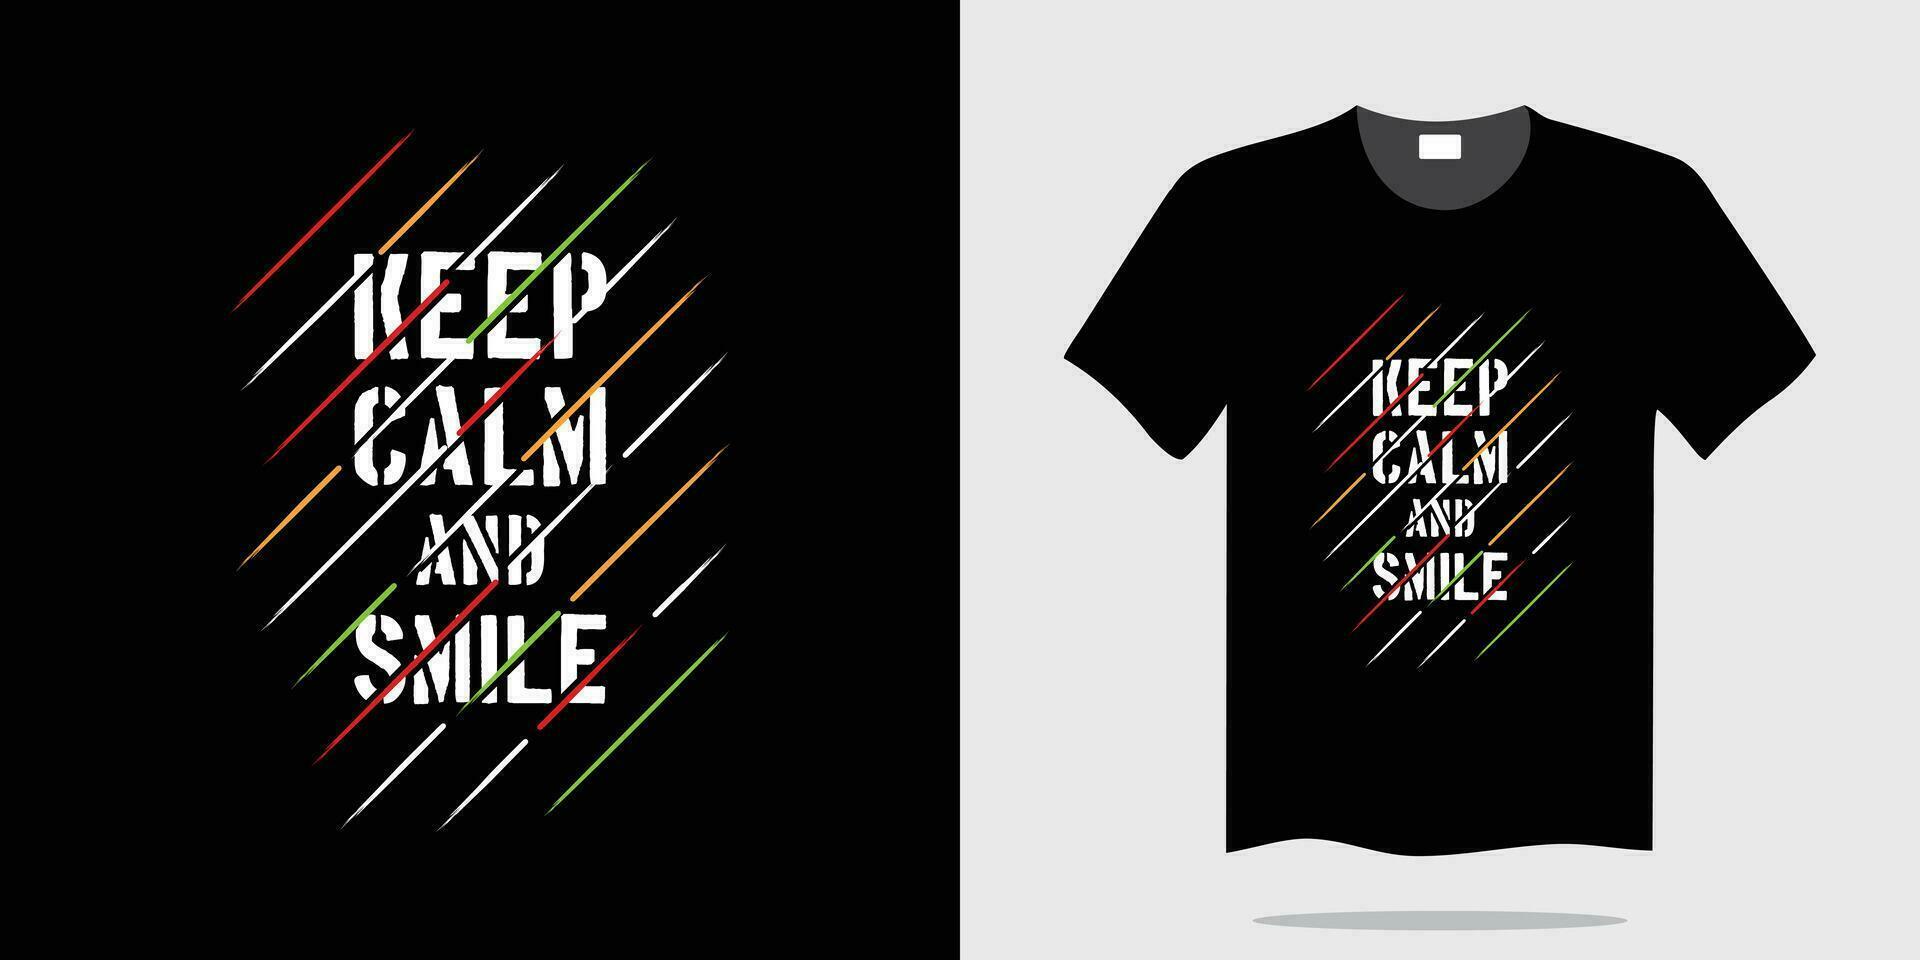 keep calm and smile typography t-shirt design vector illustration